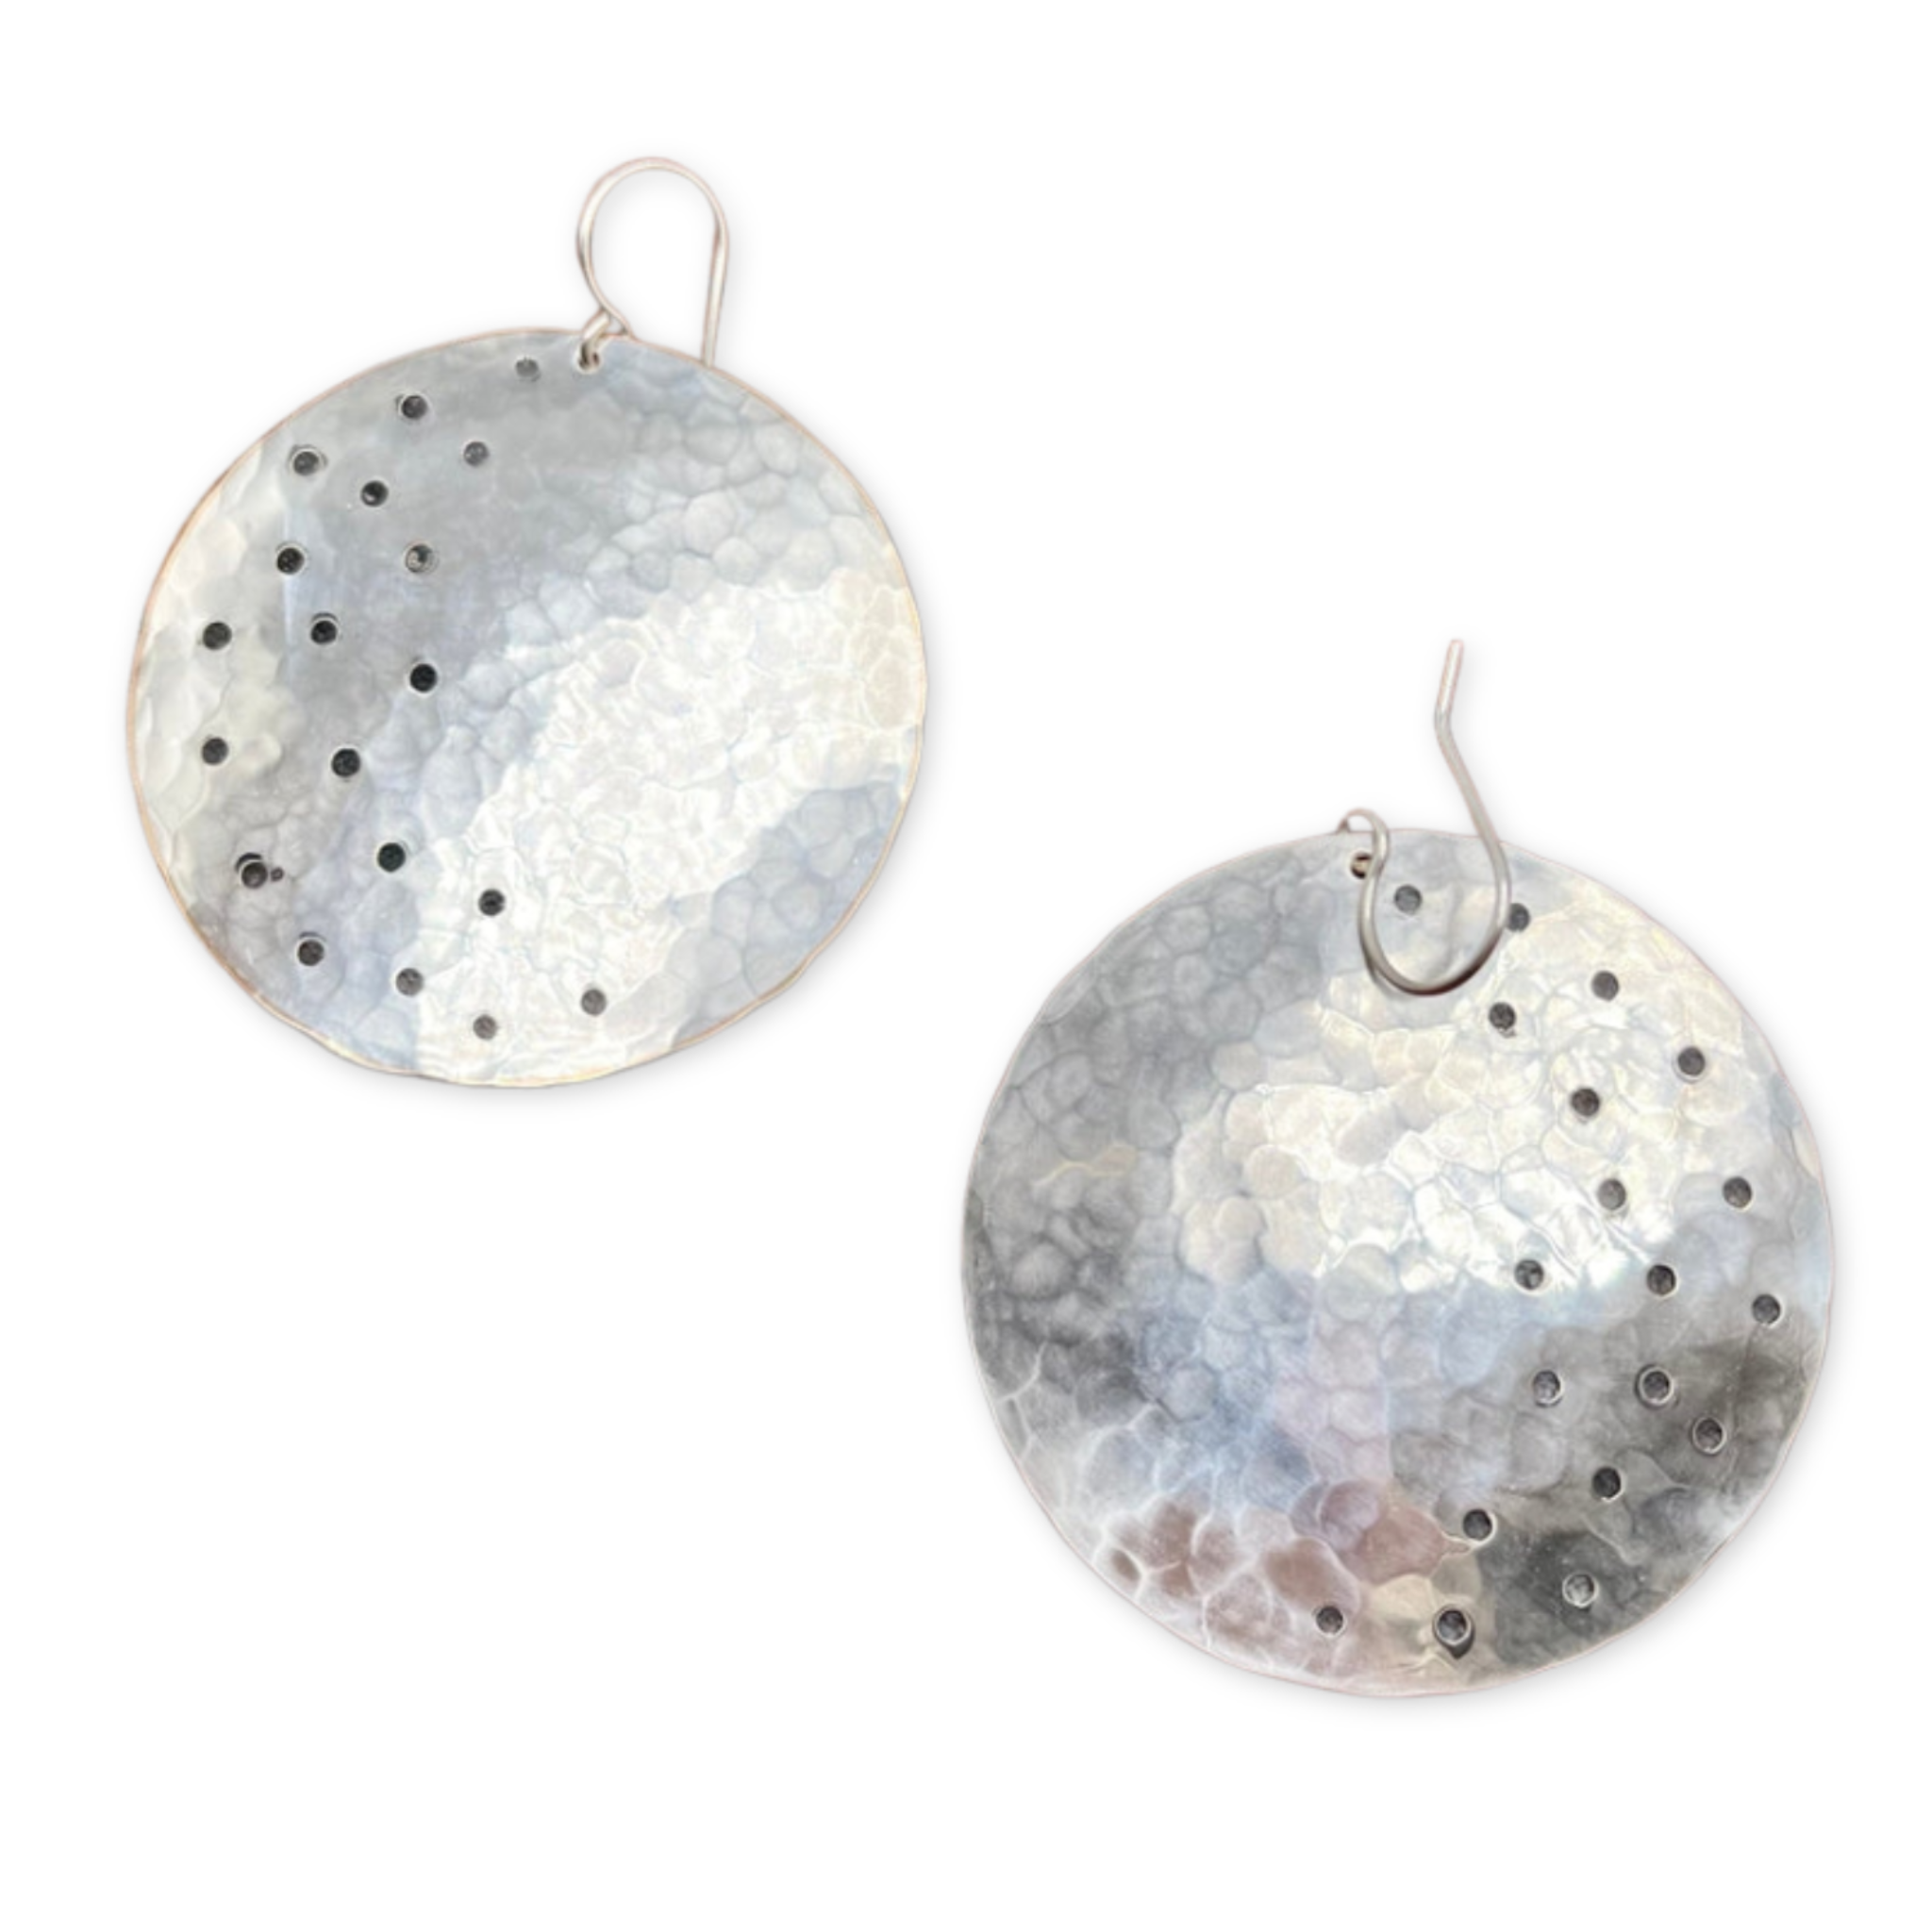 large hammered round disc earrings with black oxidized polka dot design